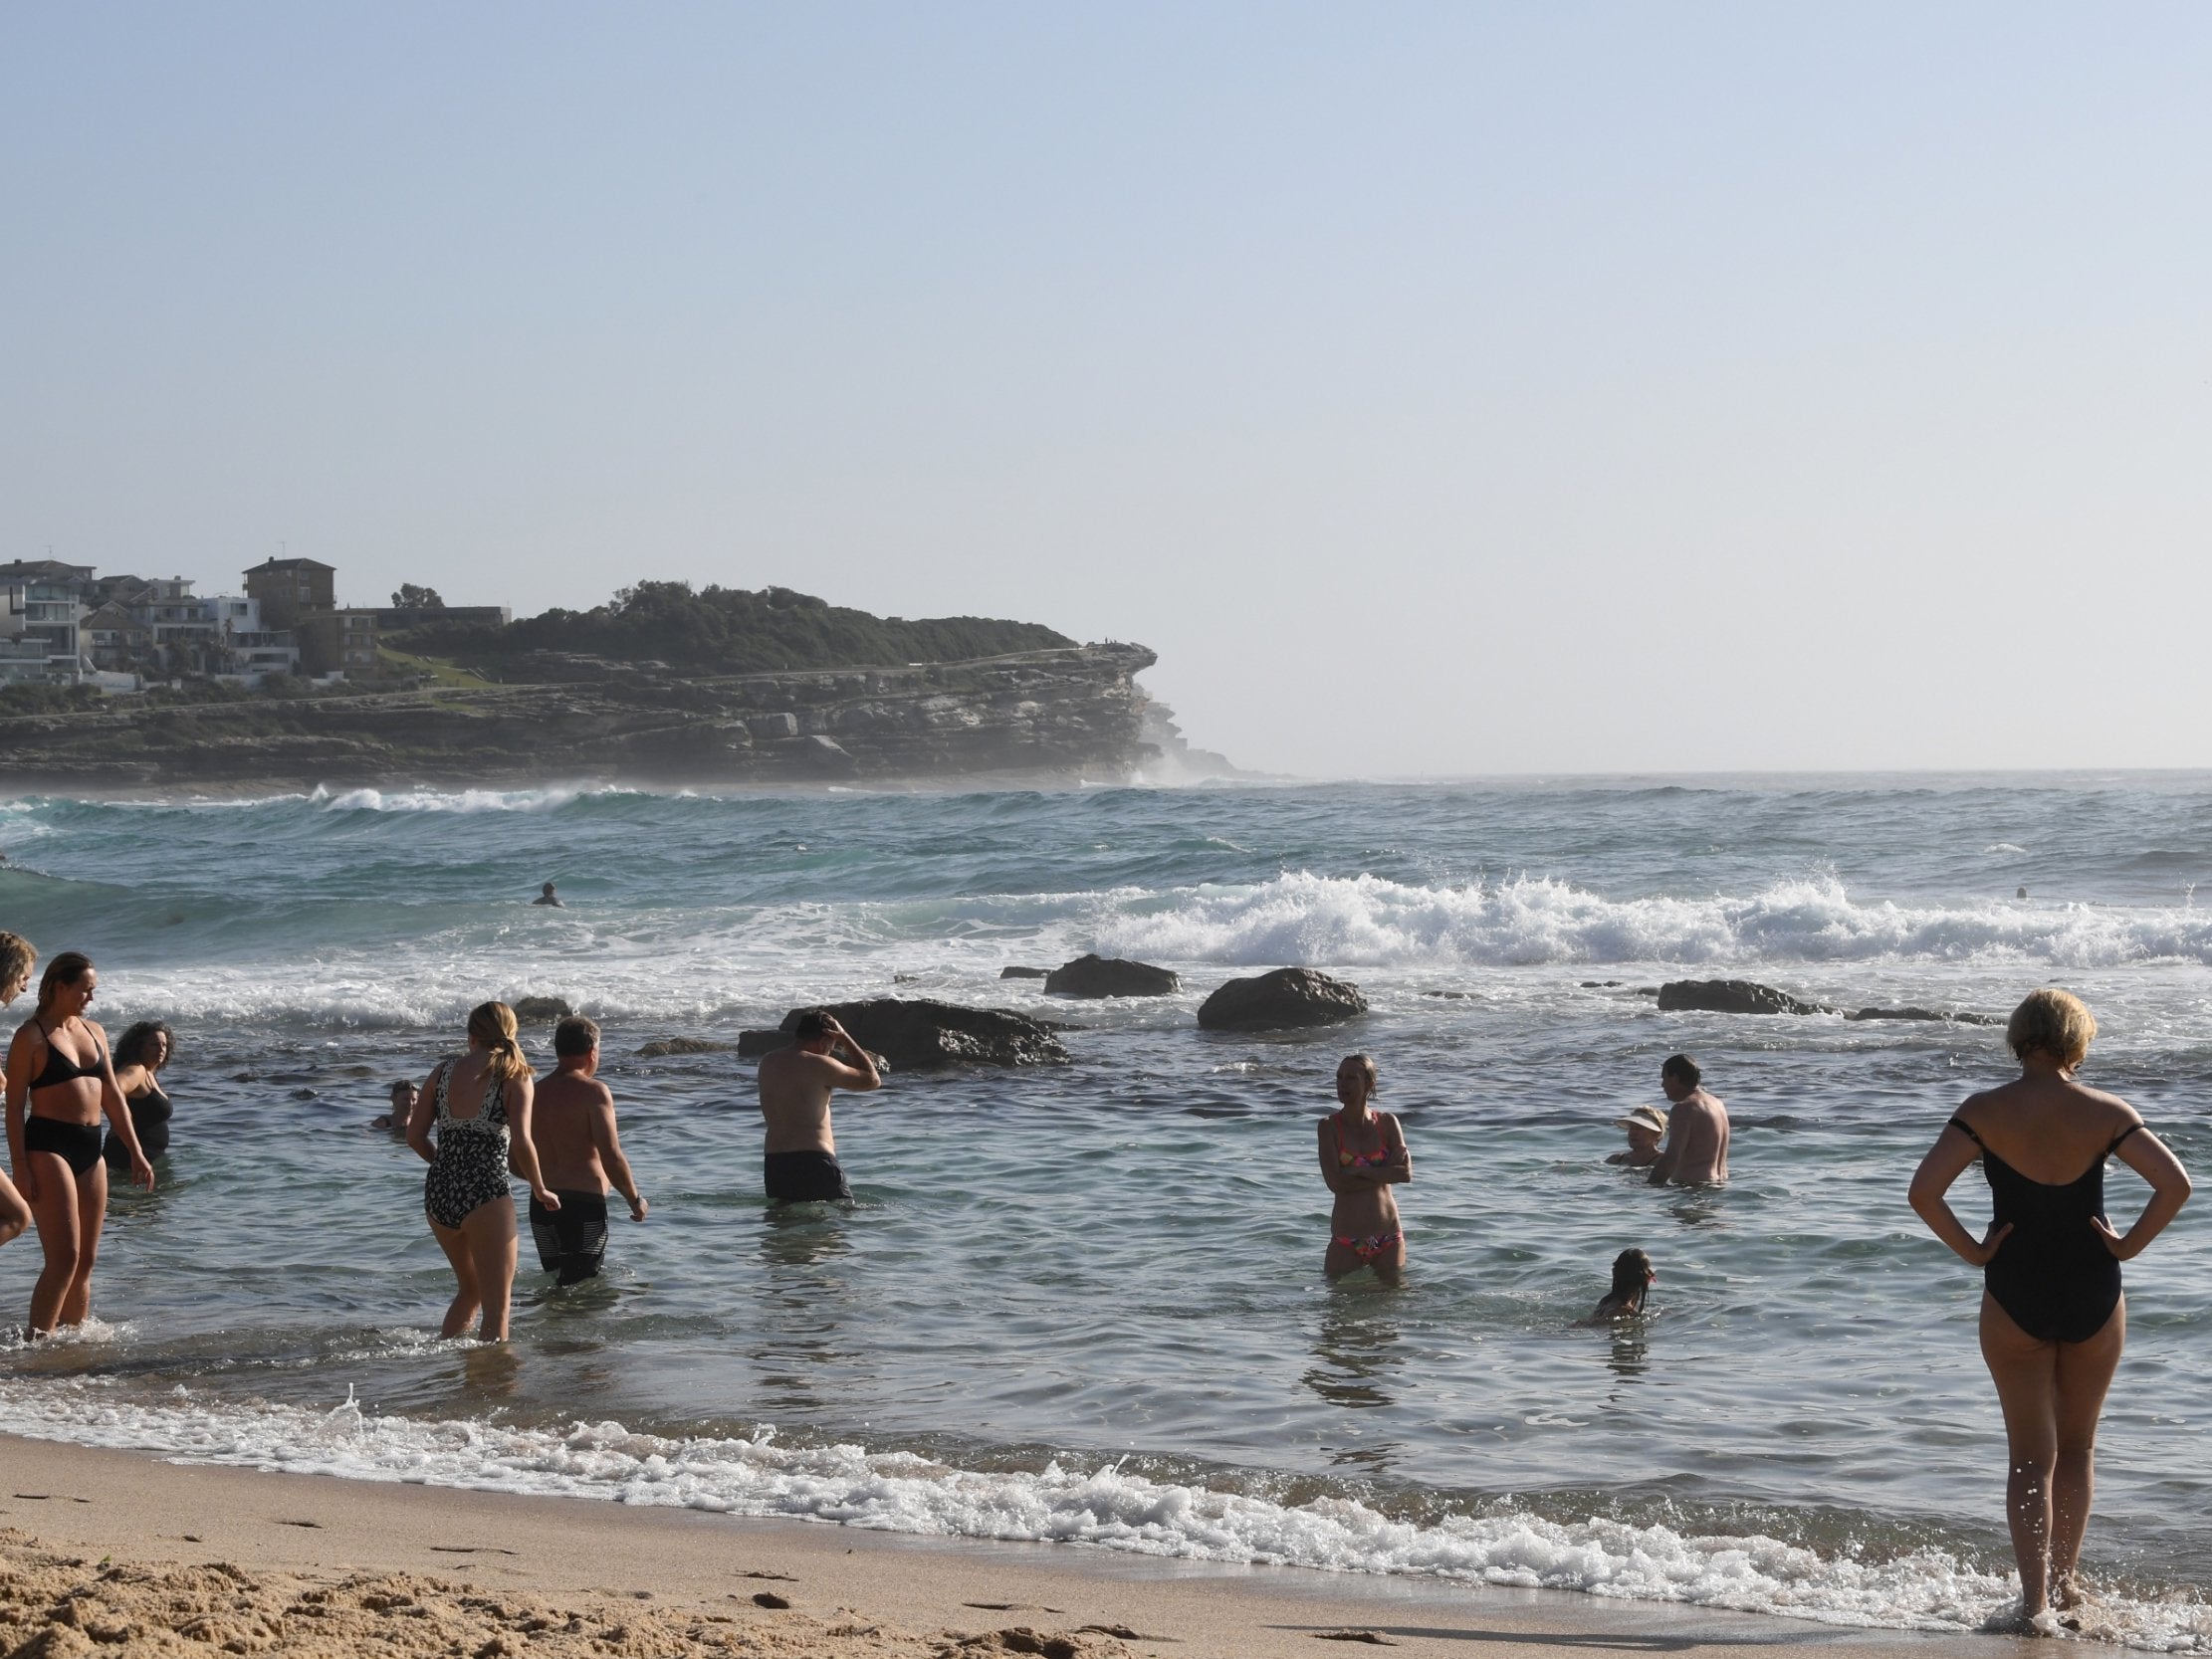 Beachgoers cool off at Bronte Beach in Sydney, New South Wales, amid an intense heatwave